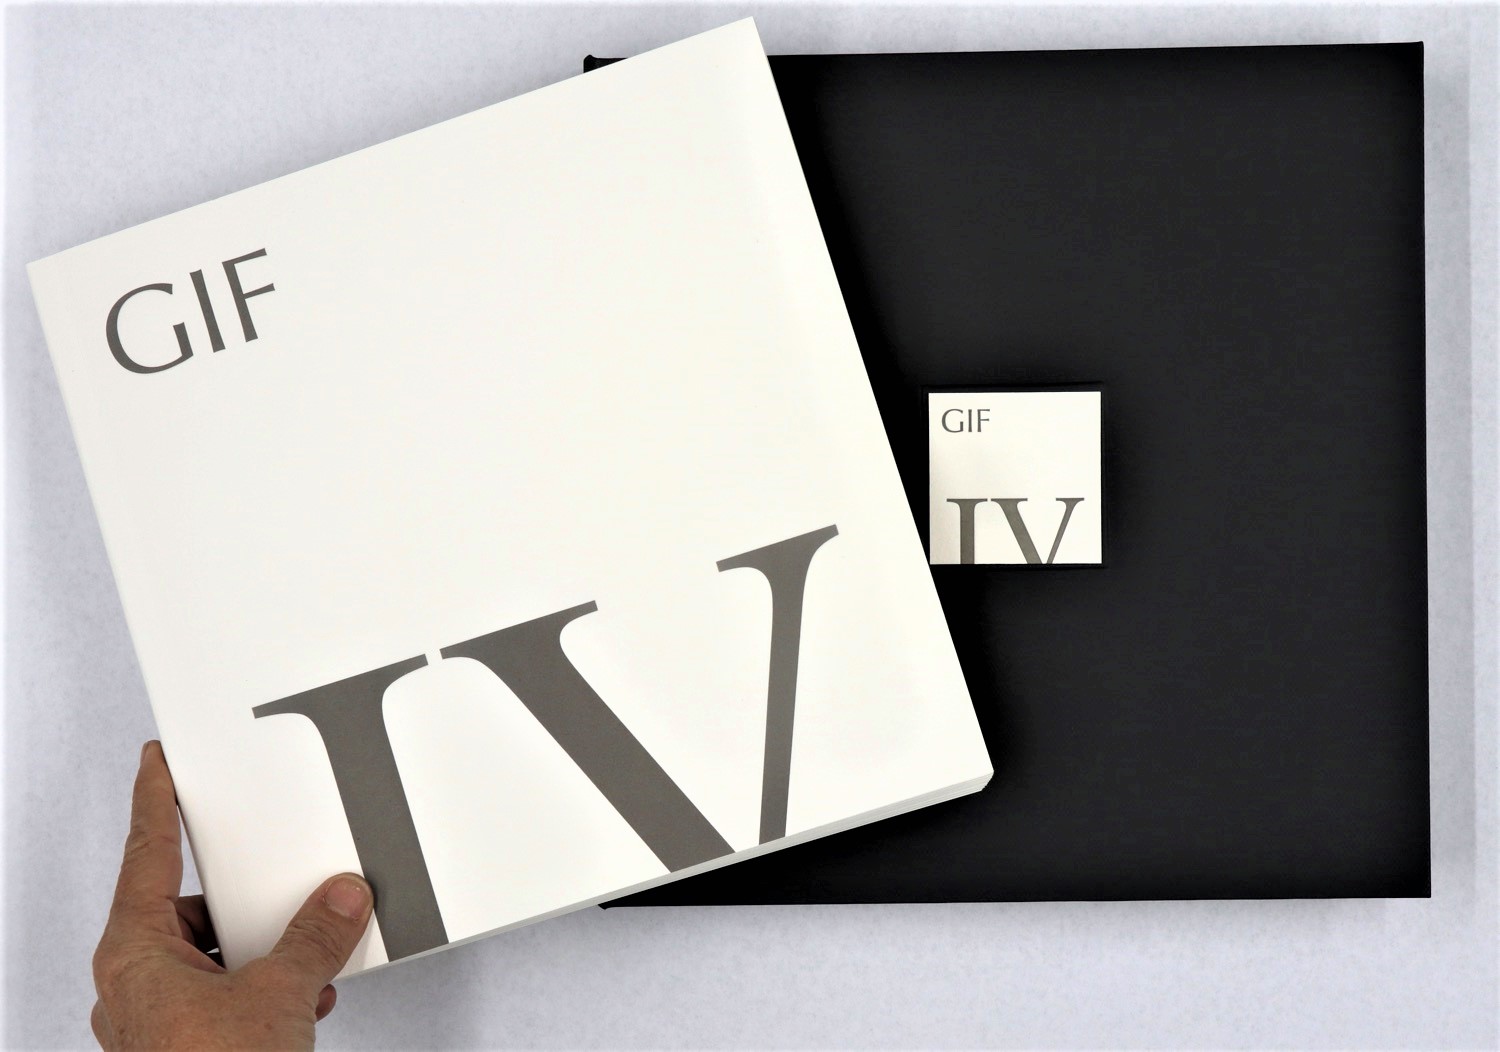 Click the image for a view of: GIF IV Cover and Box